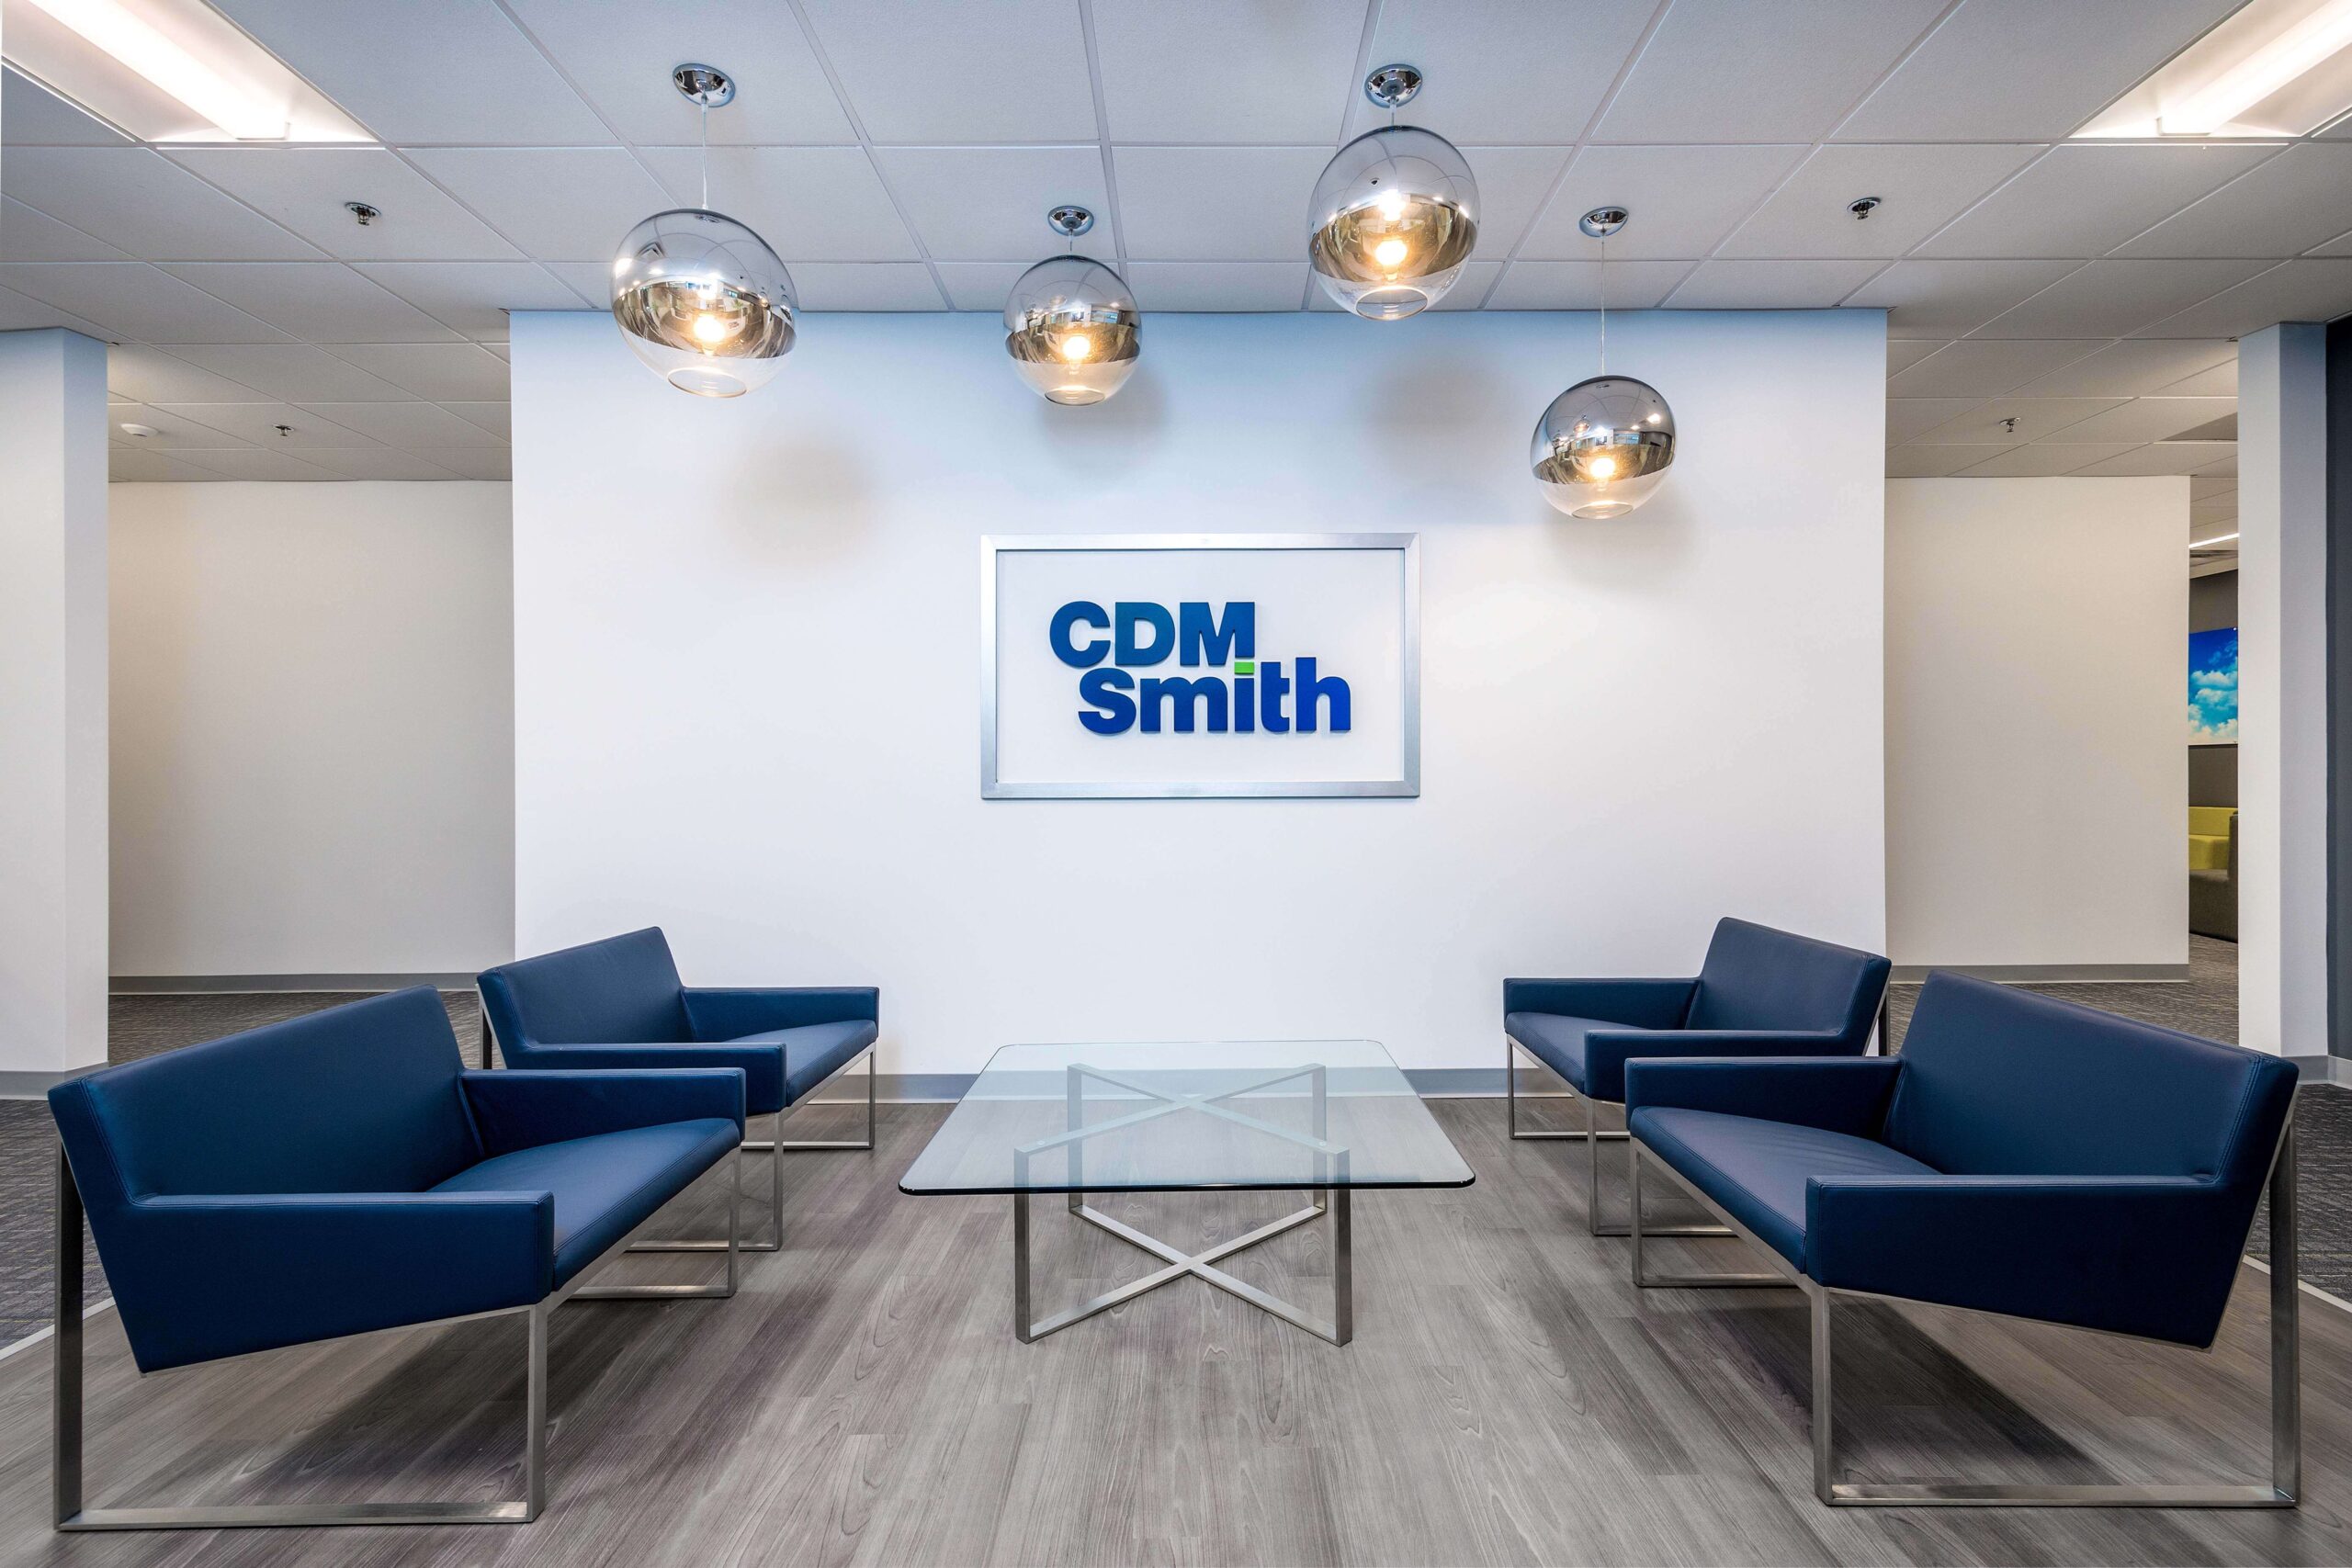 CDM Smith Office sitting area with couches facing each other and logo wall at the end